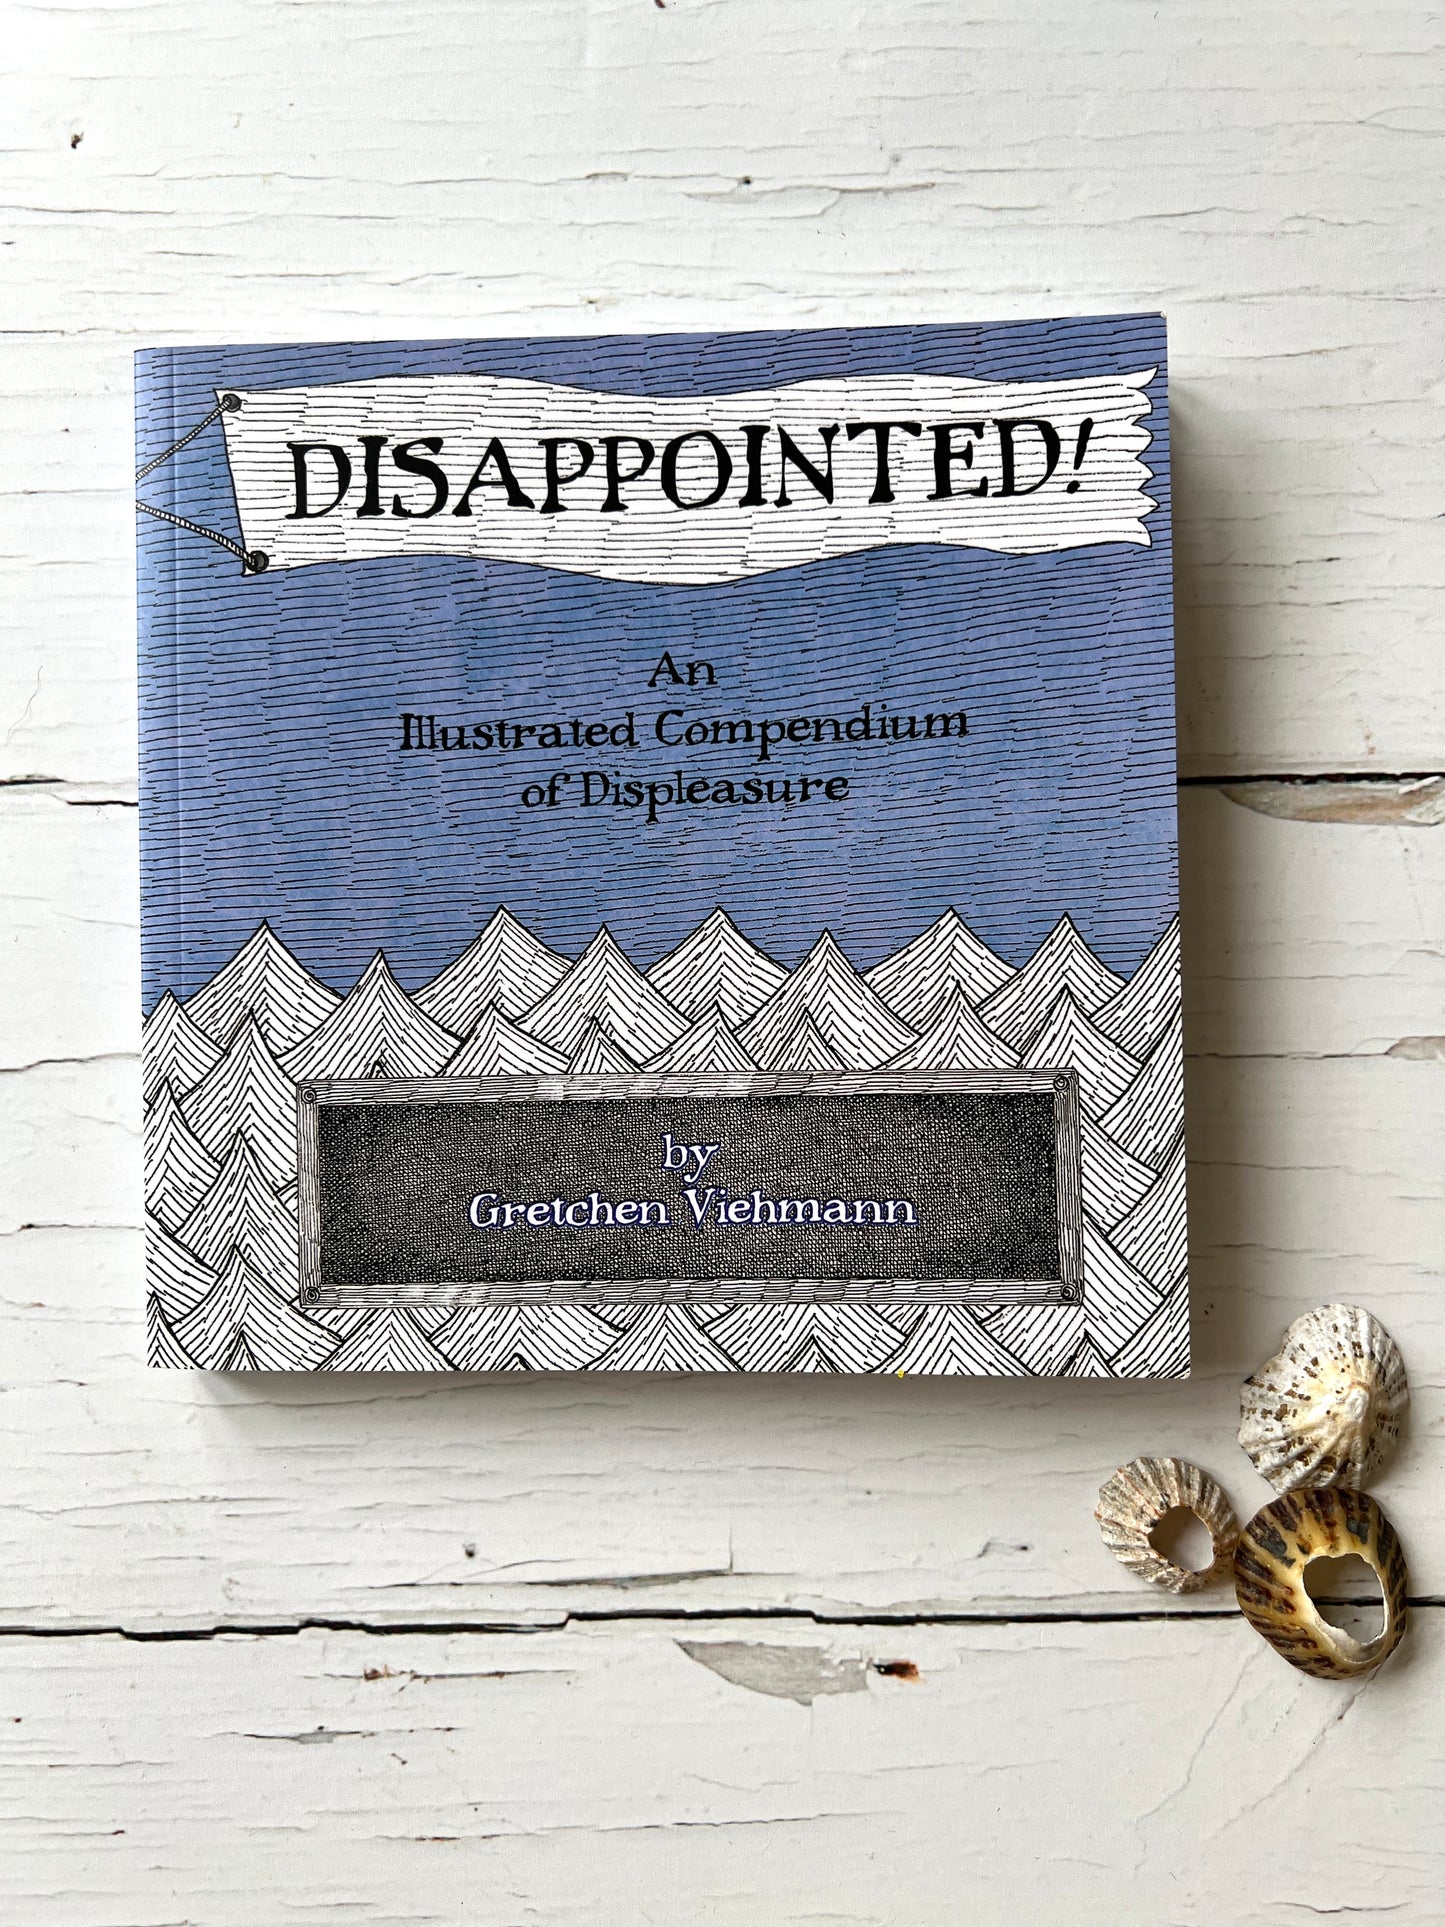 "Disappointed" - An Illustrated Compendium of Displeasure